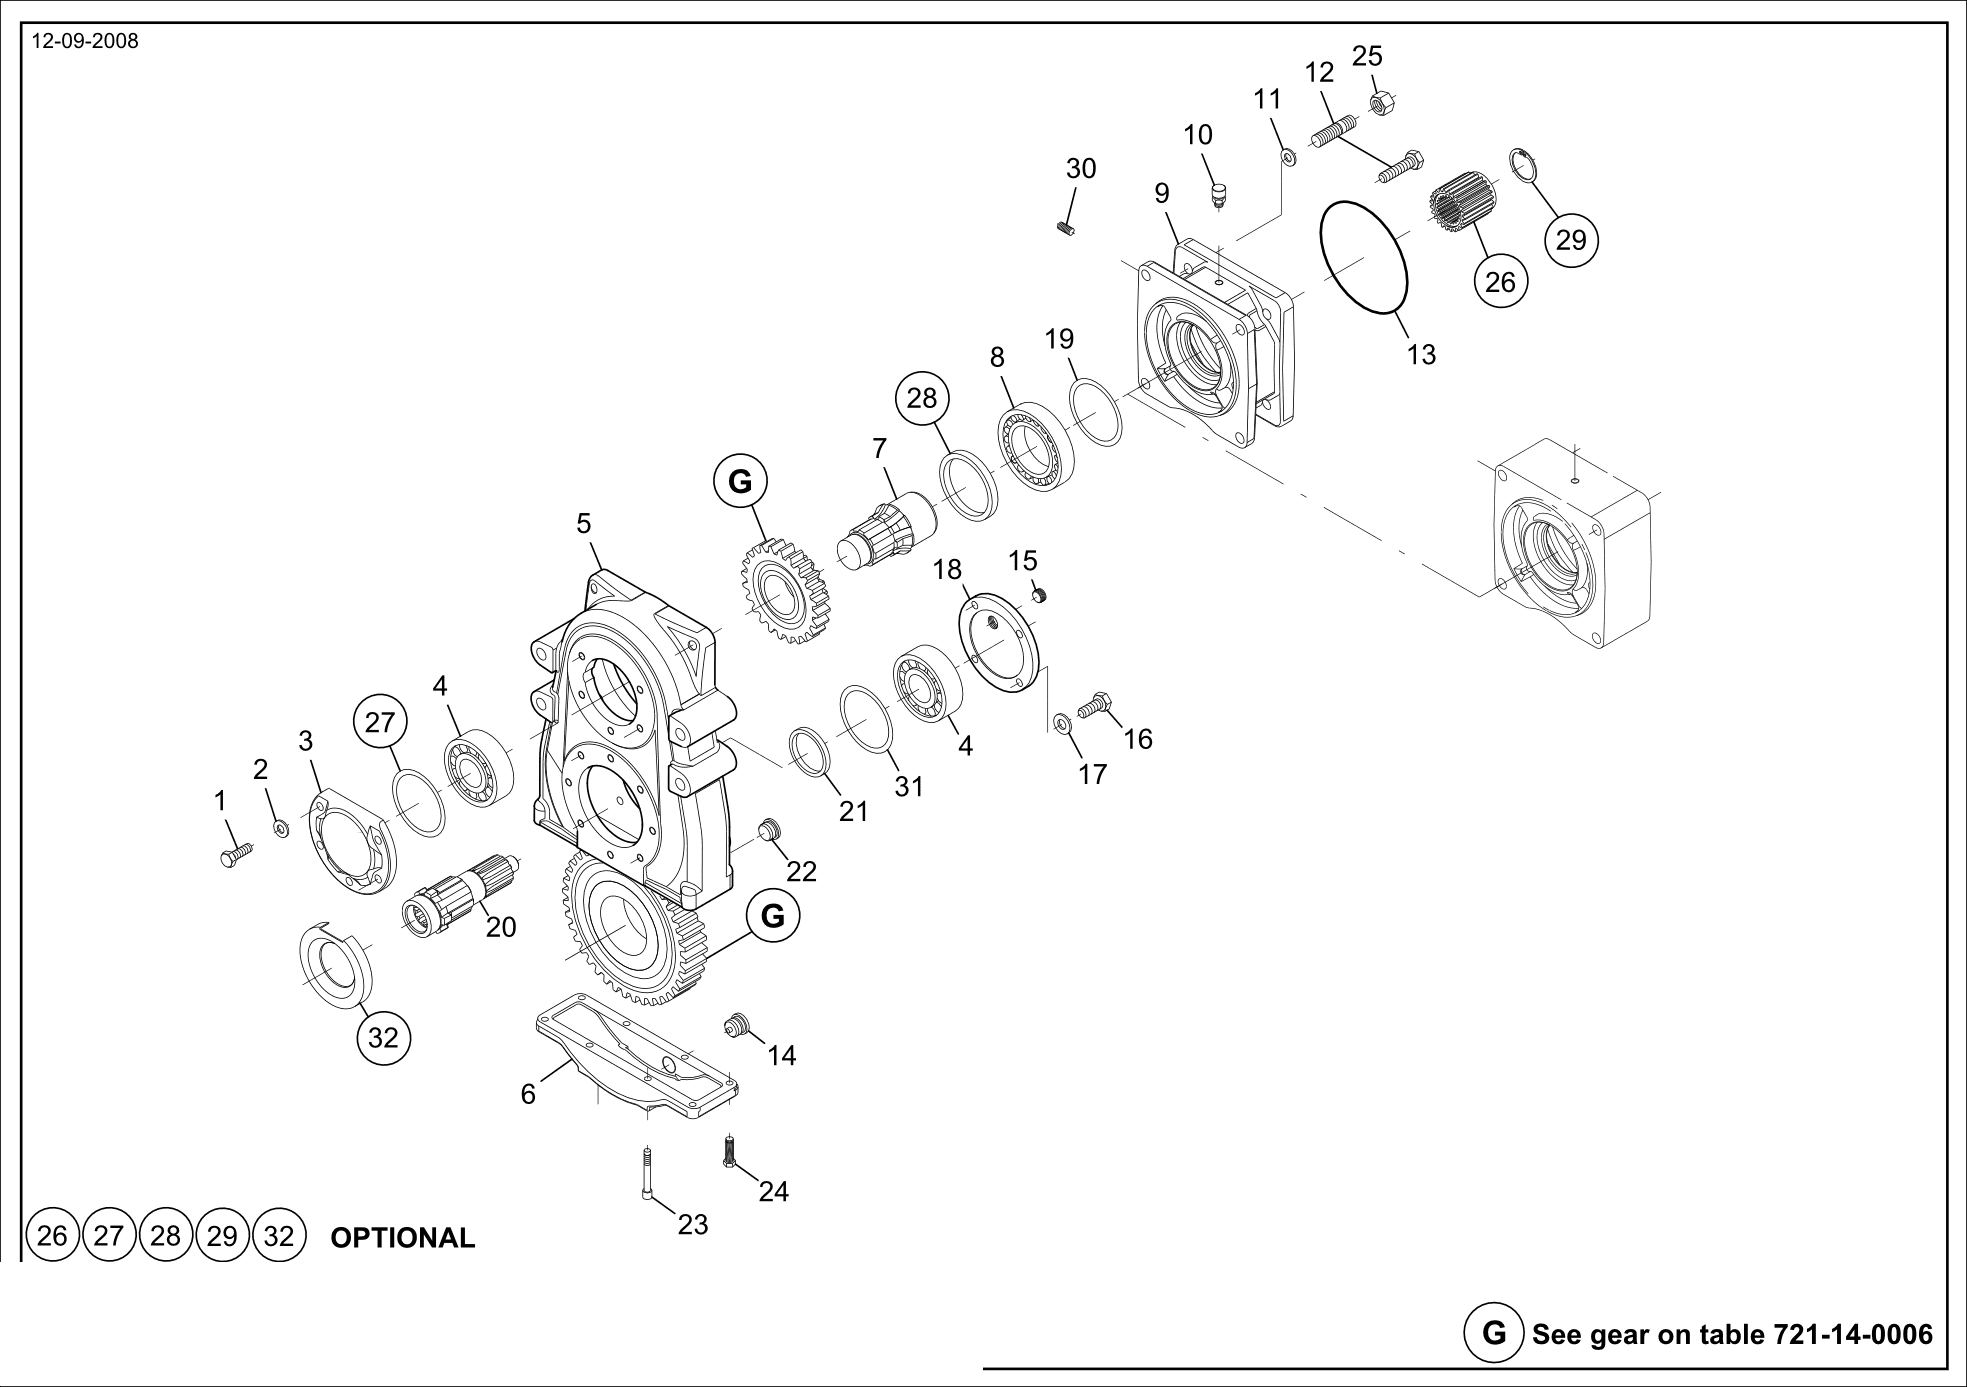 drawing for MECALAC 565A0016 - HOUSING (figure 3)